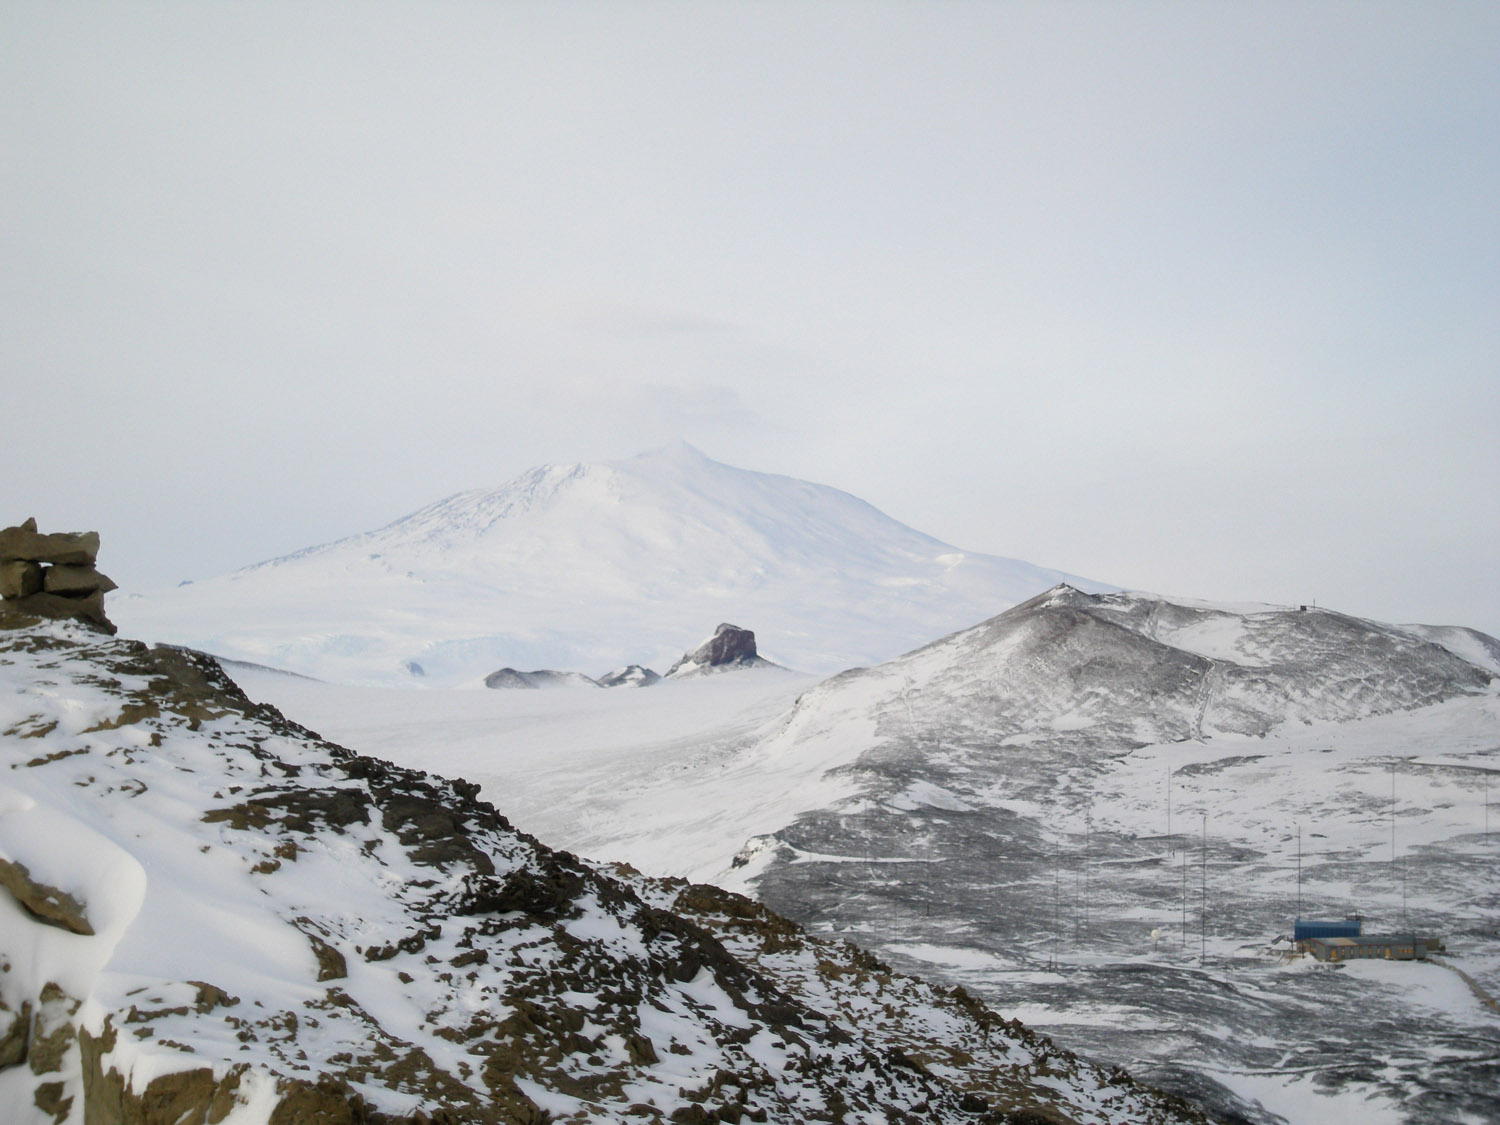 Castle Rock & Mount Erebus - view from the summit of Observation Hill